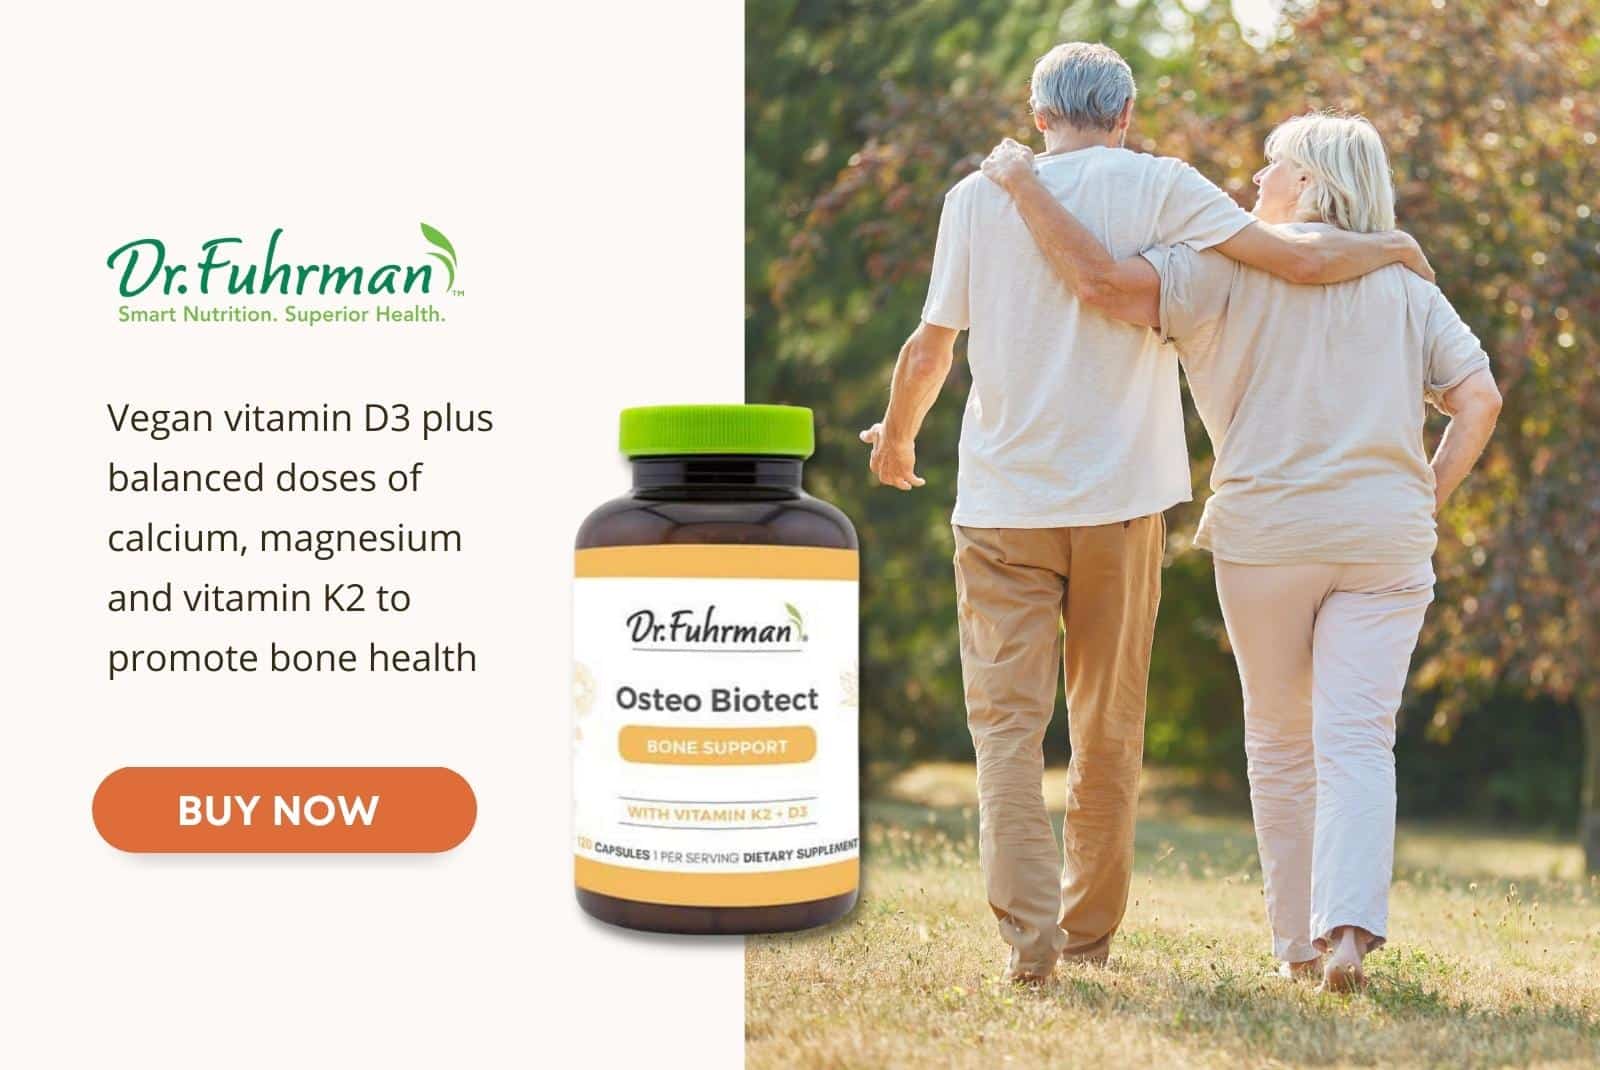 Click here to get Dr. Fuhrman's Osteo Biotect supplement.